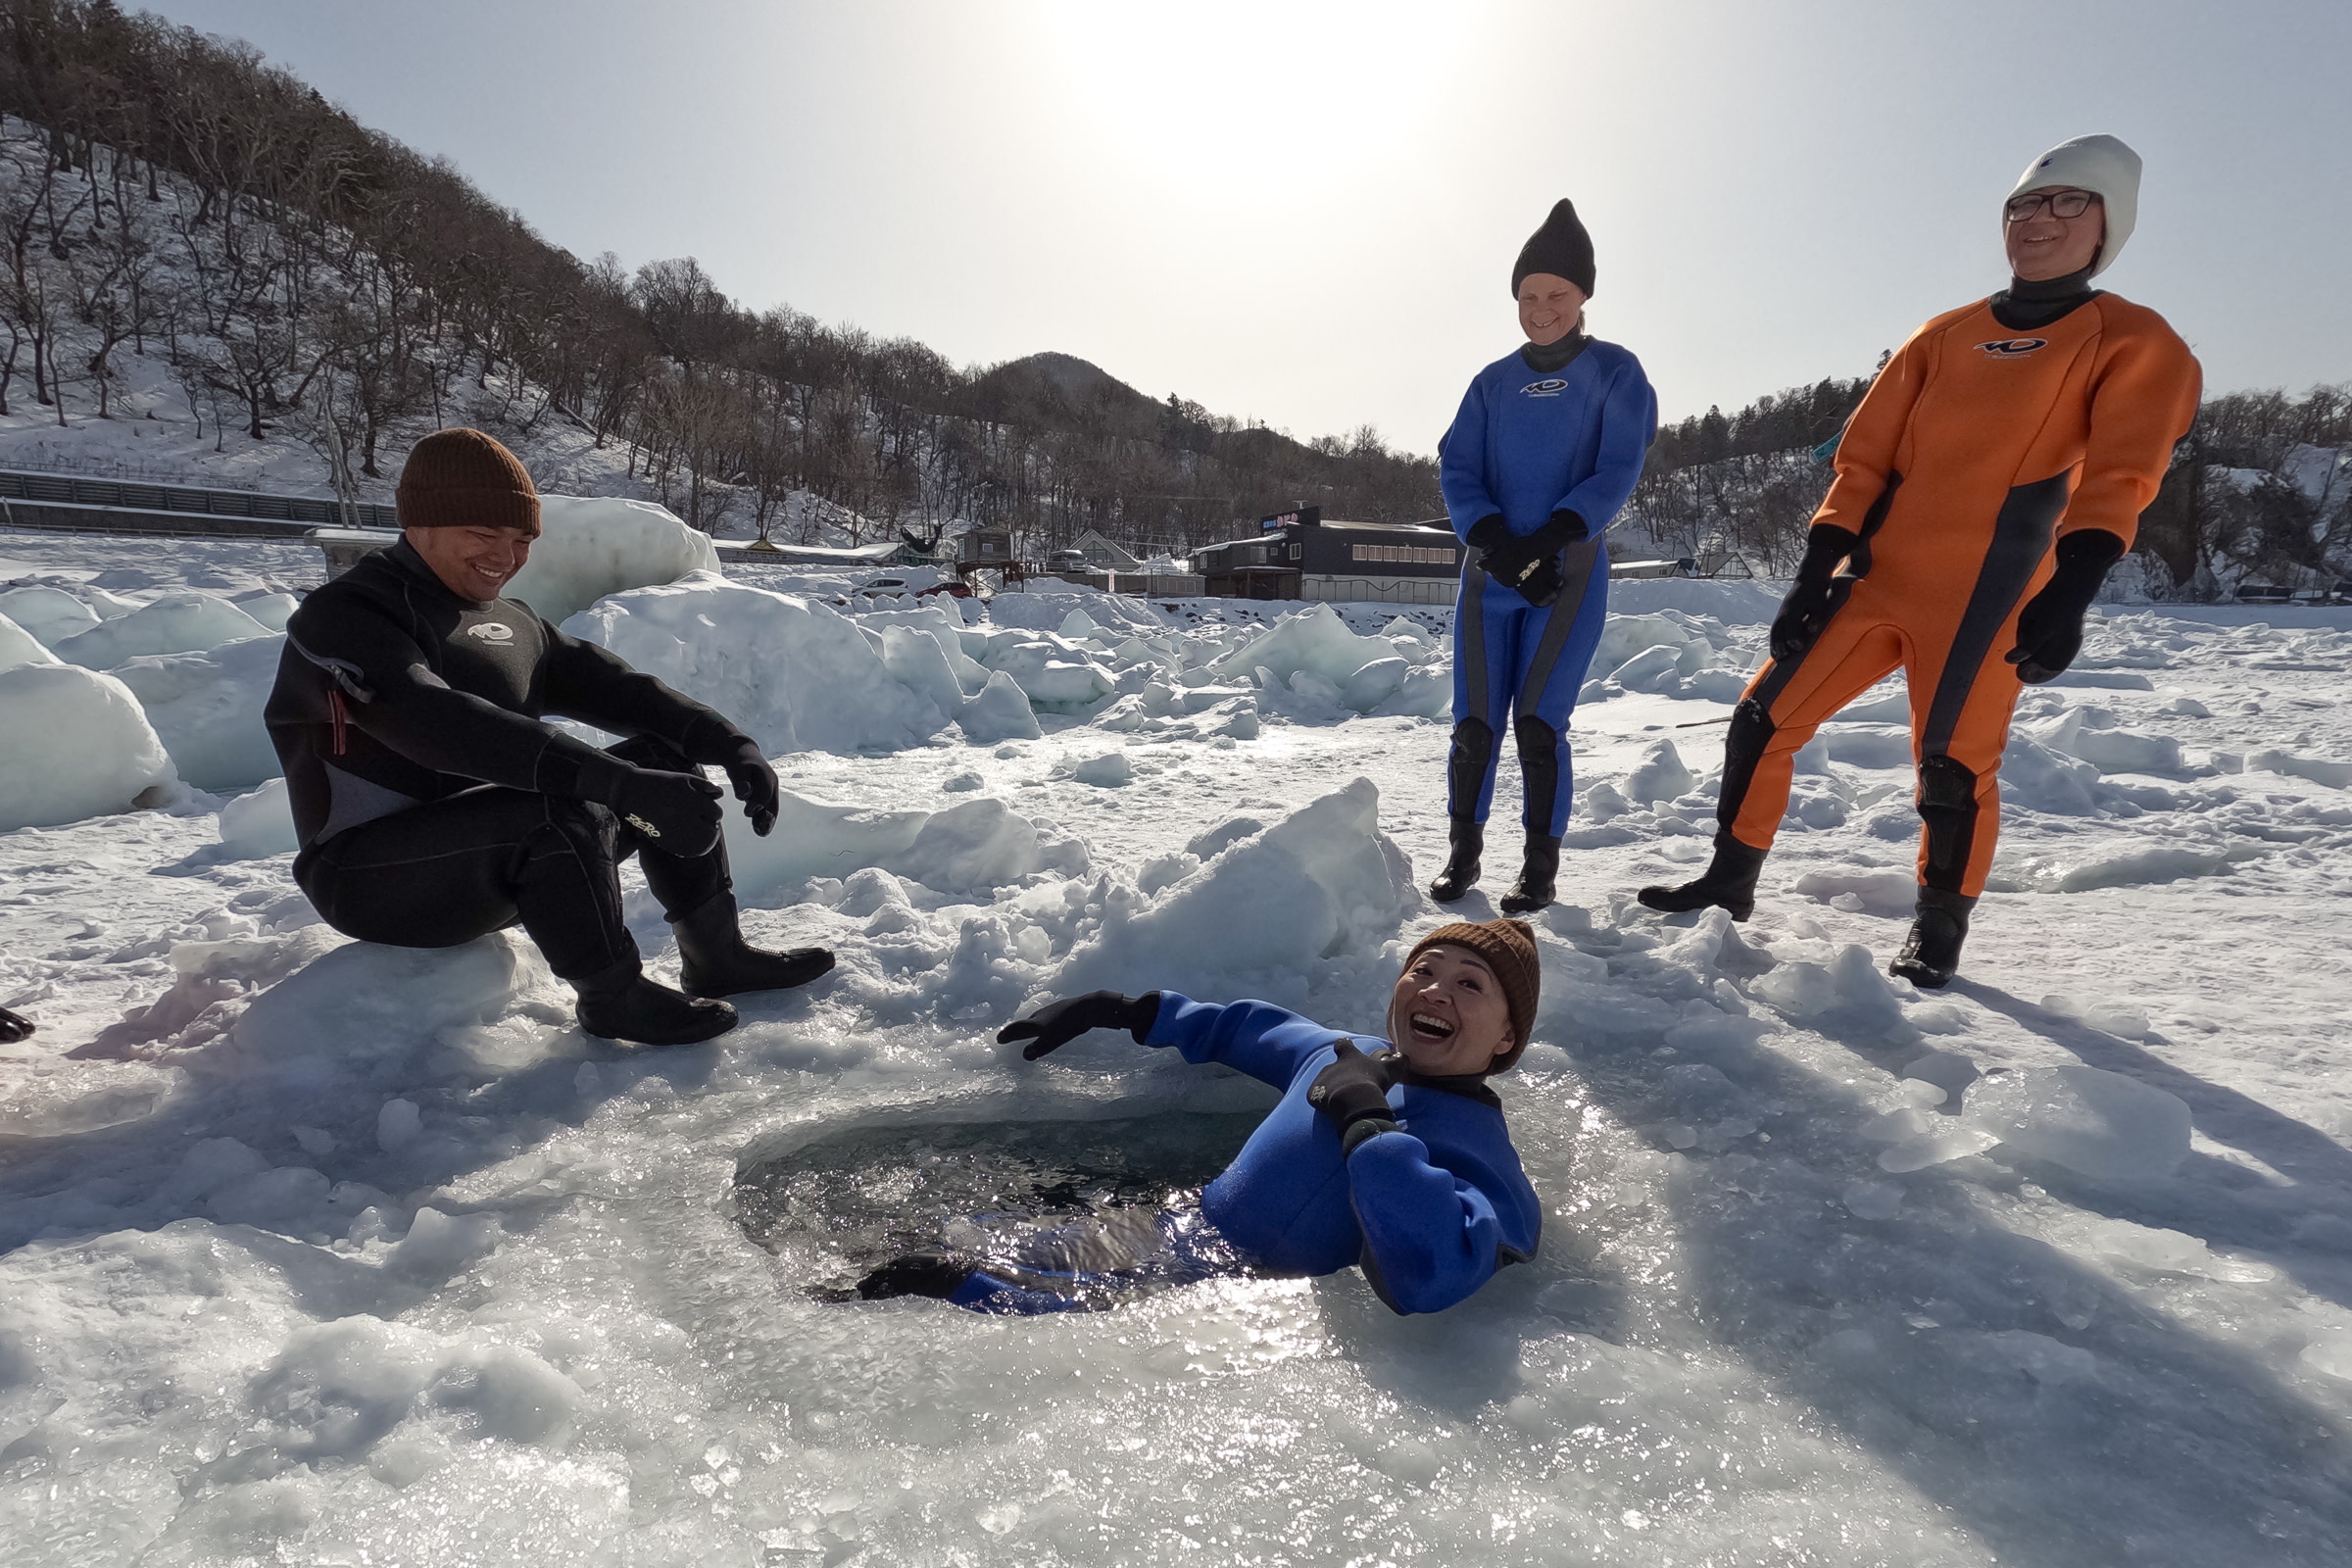 Guests in dry-suits take a winter dip in the frozen Okhotsk Sea.